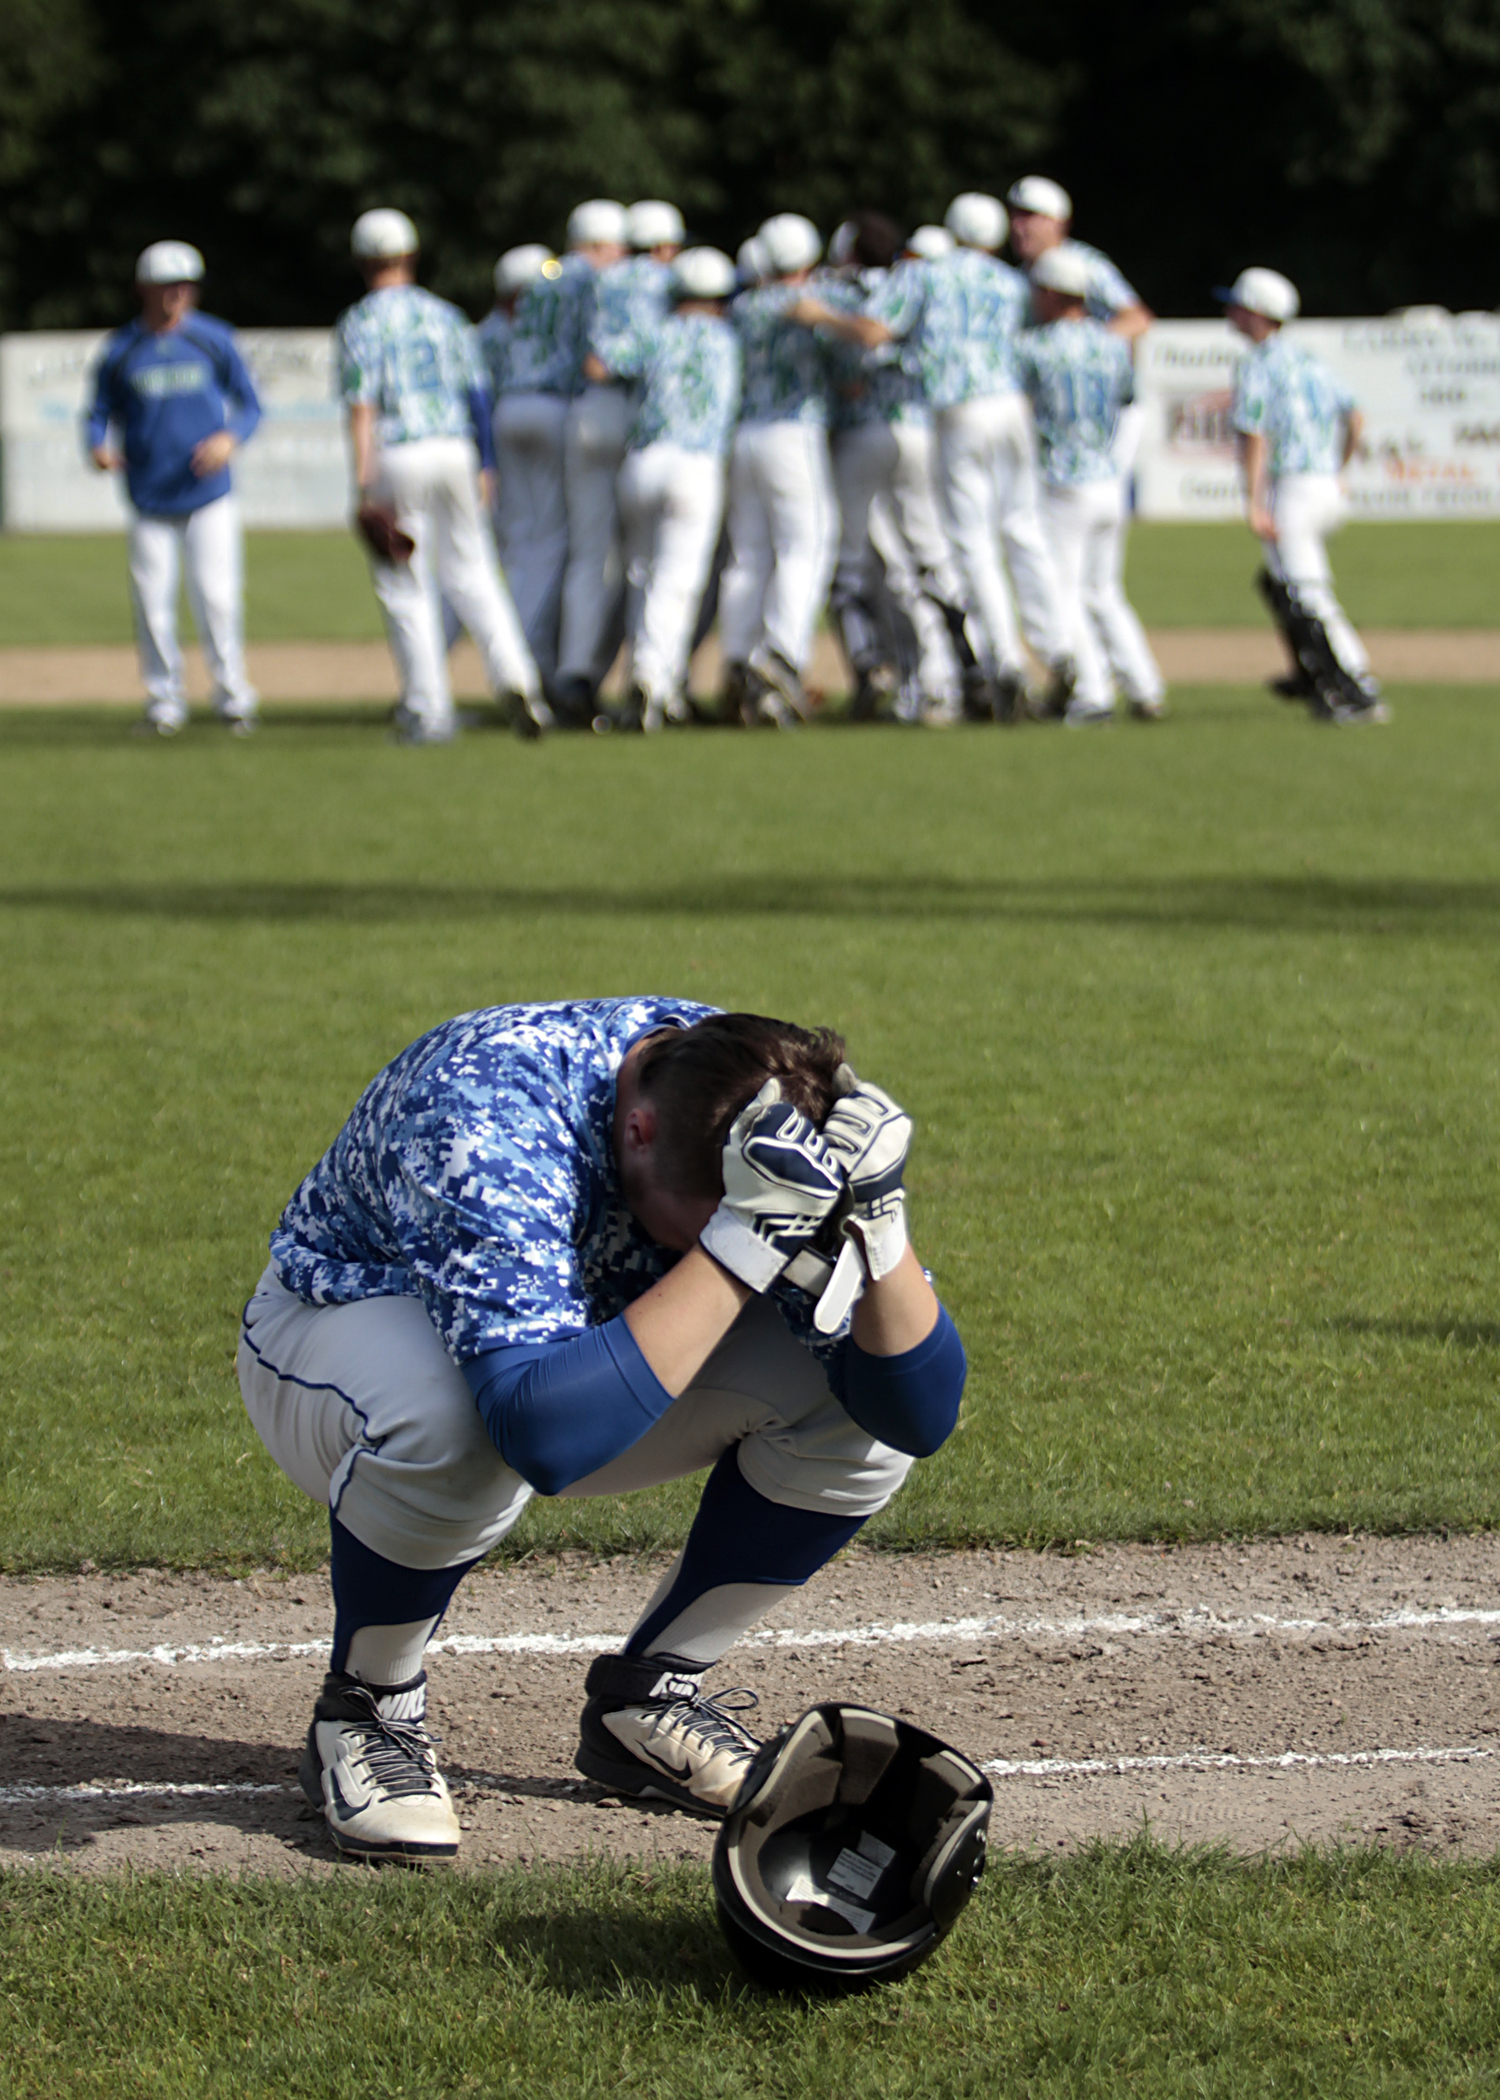  Trent Schulte, of Bainbridge High School, crouches near the dugout&nbsp;visibly upset following the varsity baseball team's 1-0 loss in the second game of the 2013 State Tournament. The victorious team from Shorewood High celebrates in the backgroun